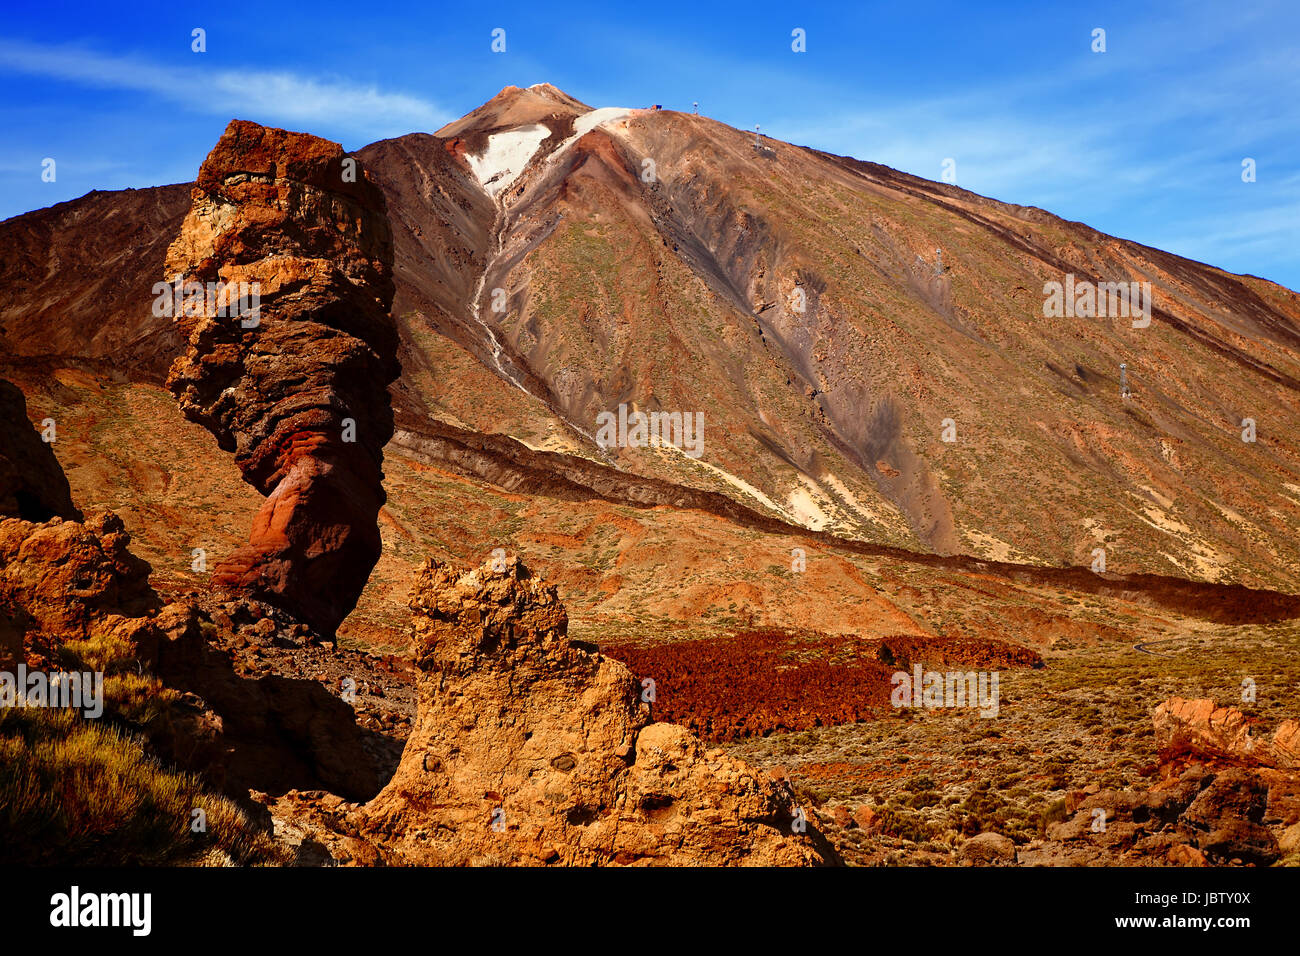 Volcano Teide with Roque Cinchado in the foreground, Island Tenerife, Canary Islands, Spain. Stock Photo